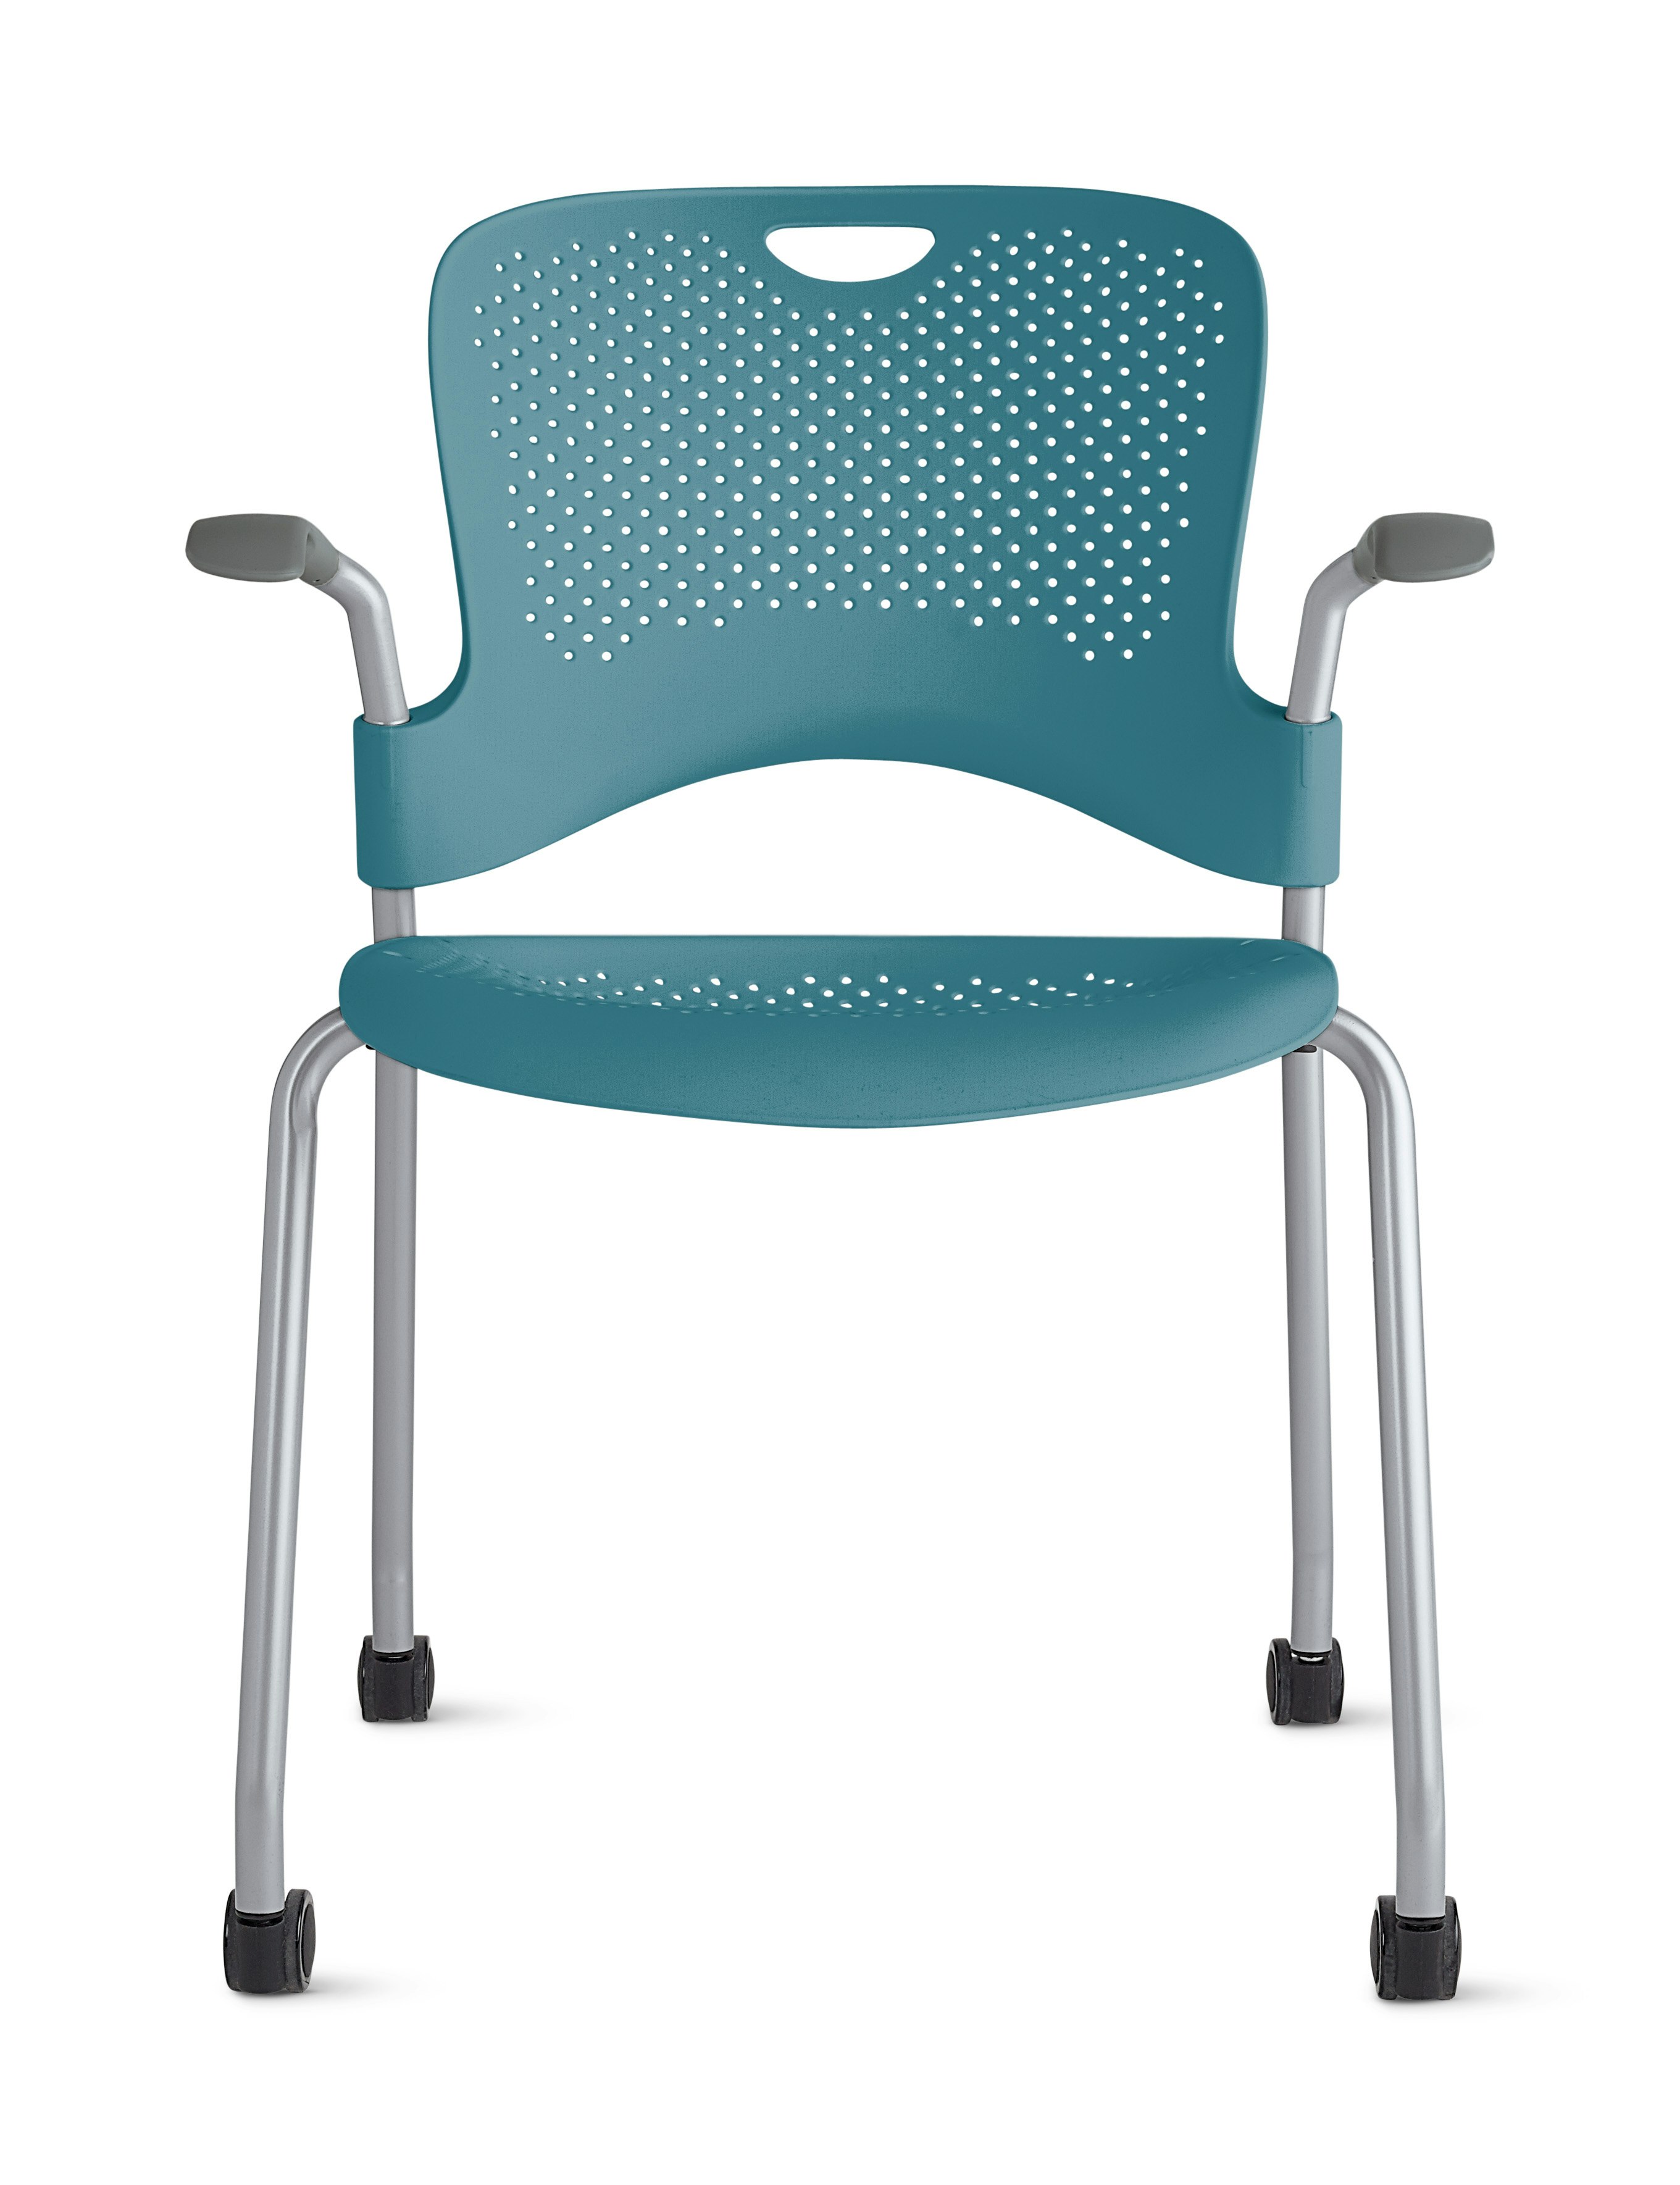 Details about   Herman Miller Caper Side Chair W/ Arms Stacking Side Chair Stool Light Grey 